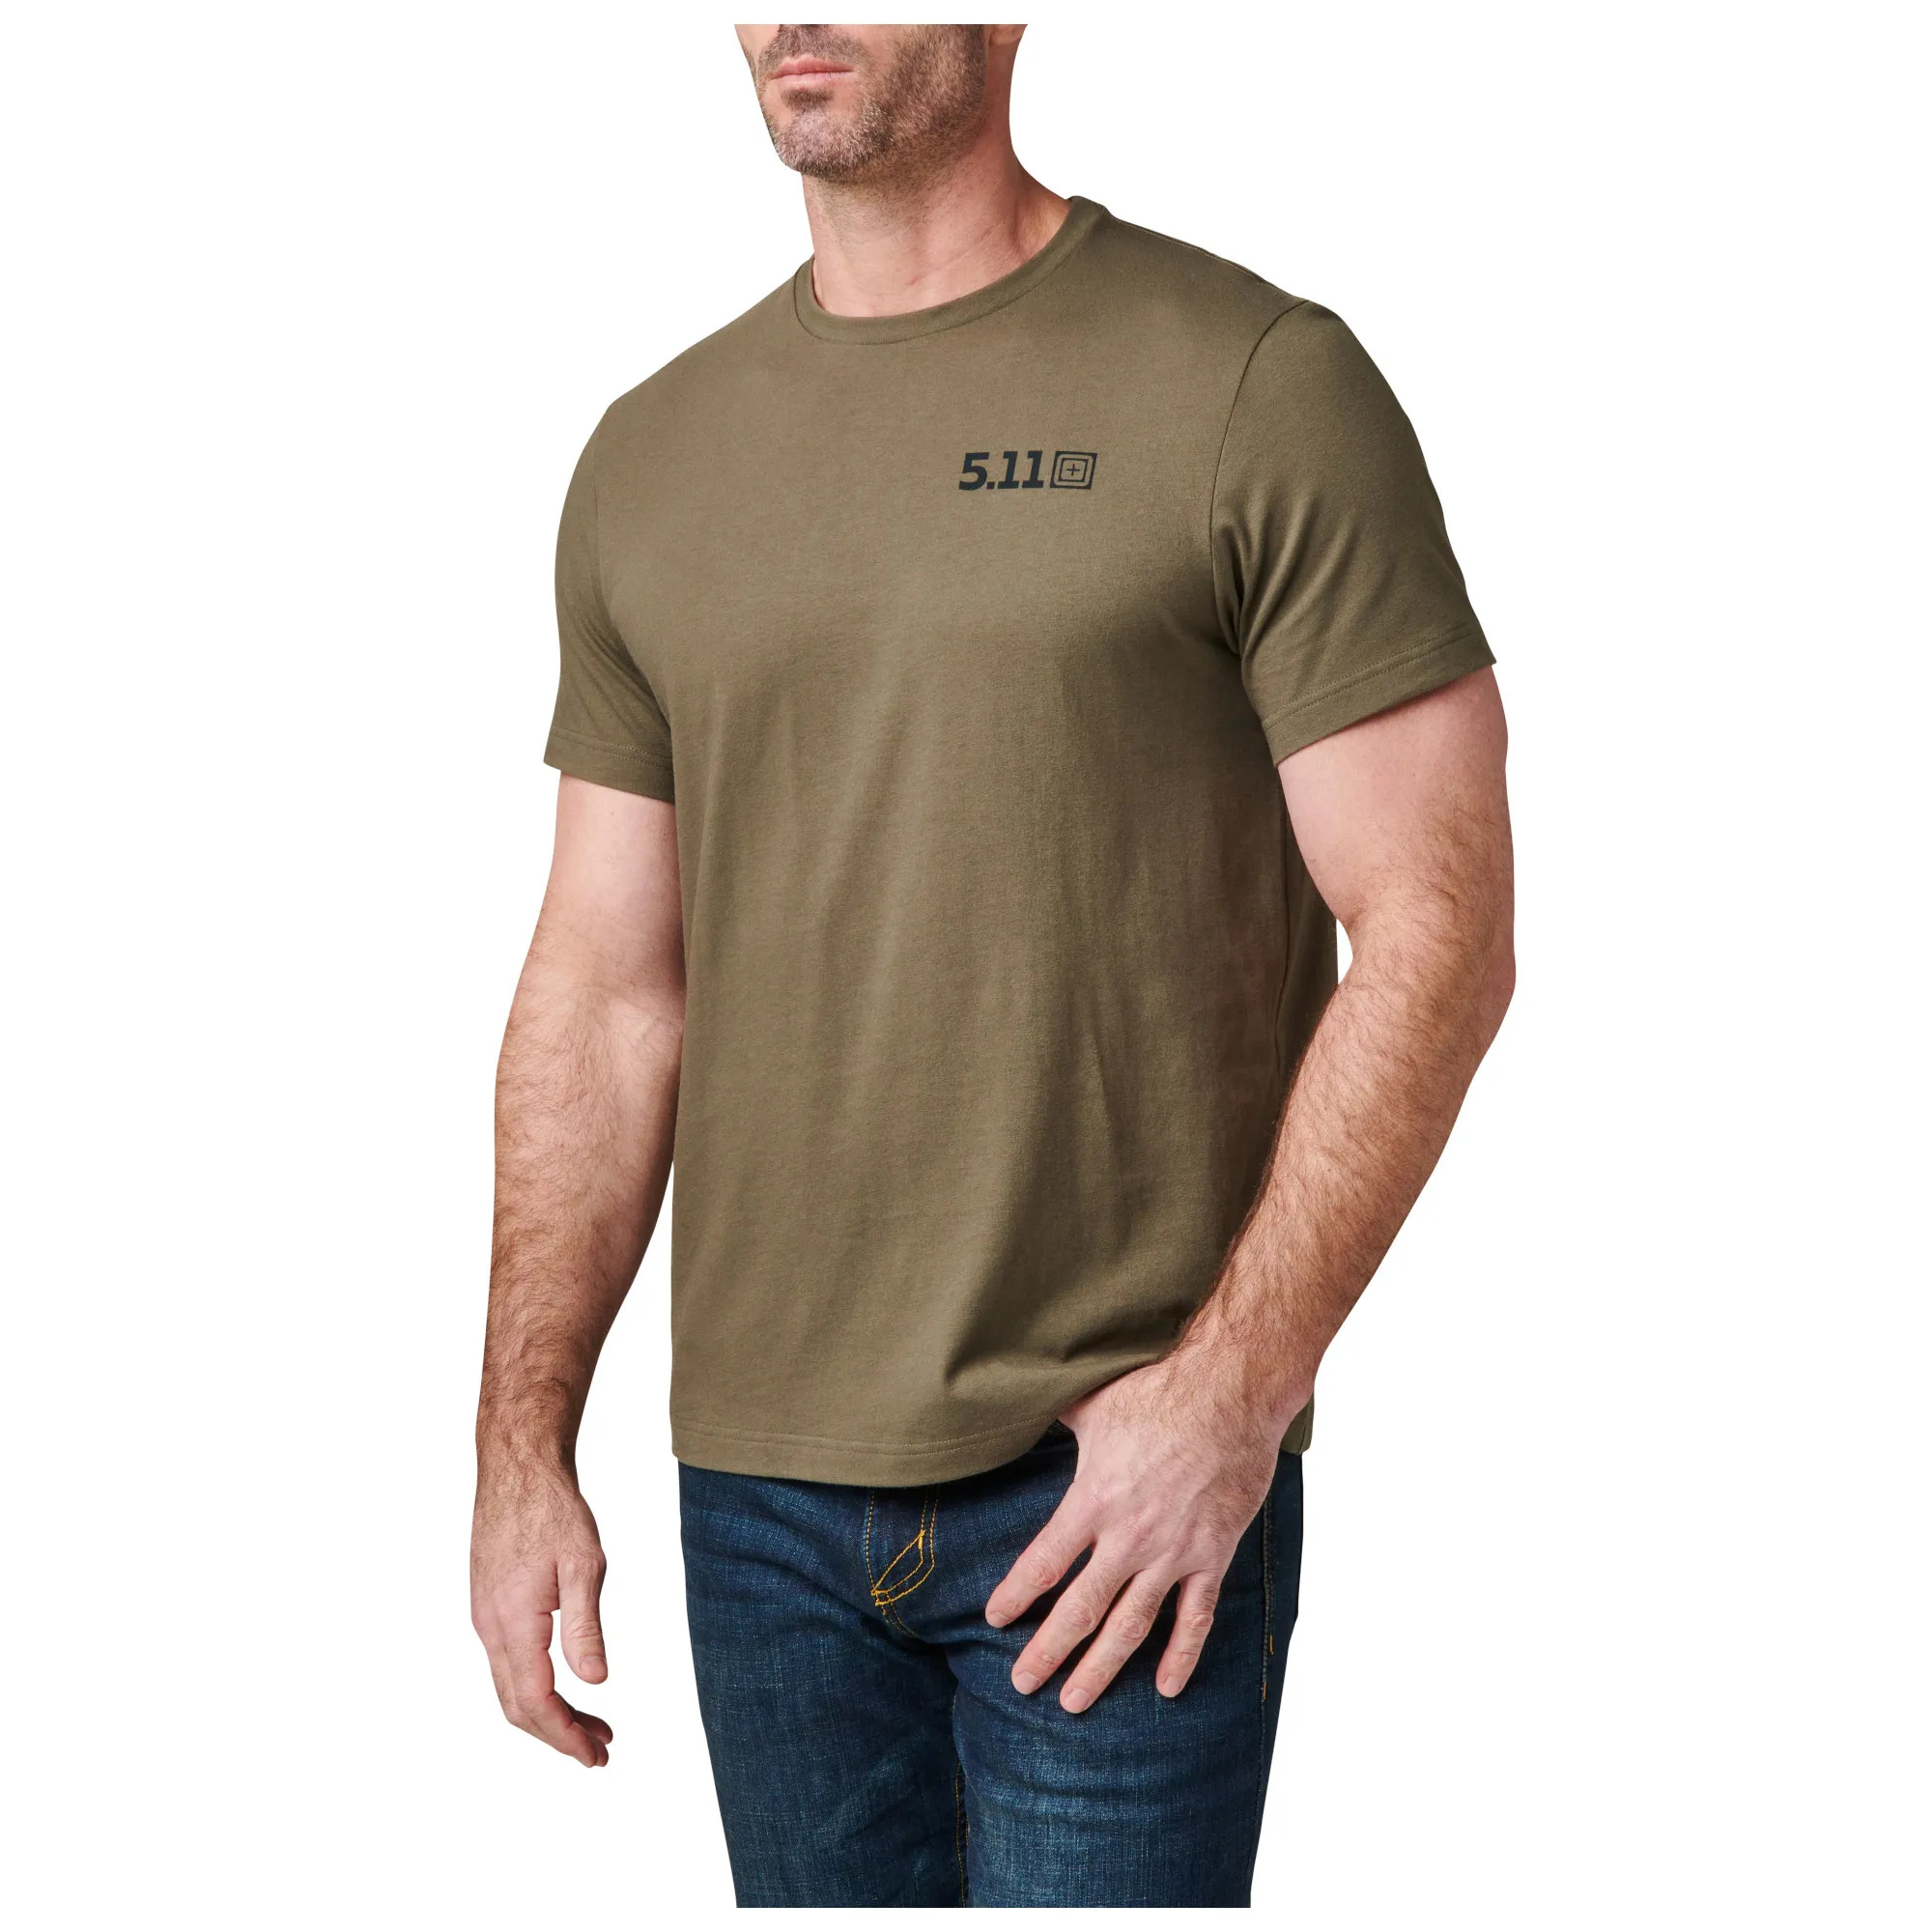 U.S. Army Star Under Armour Performance Cotton T-Shirt (OD Green)